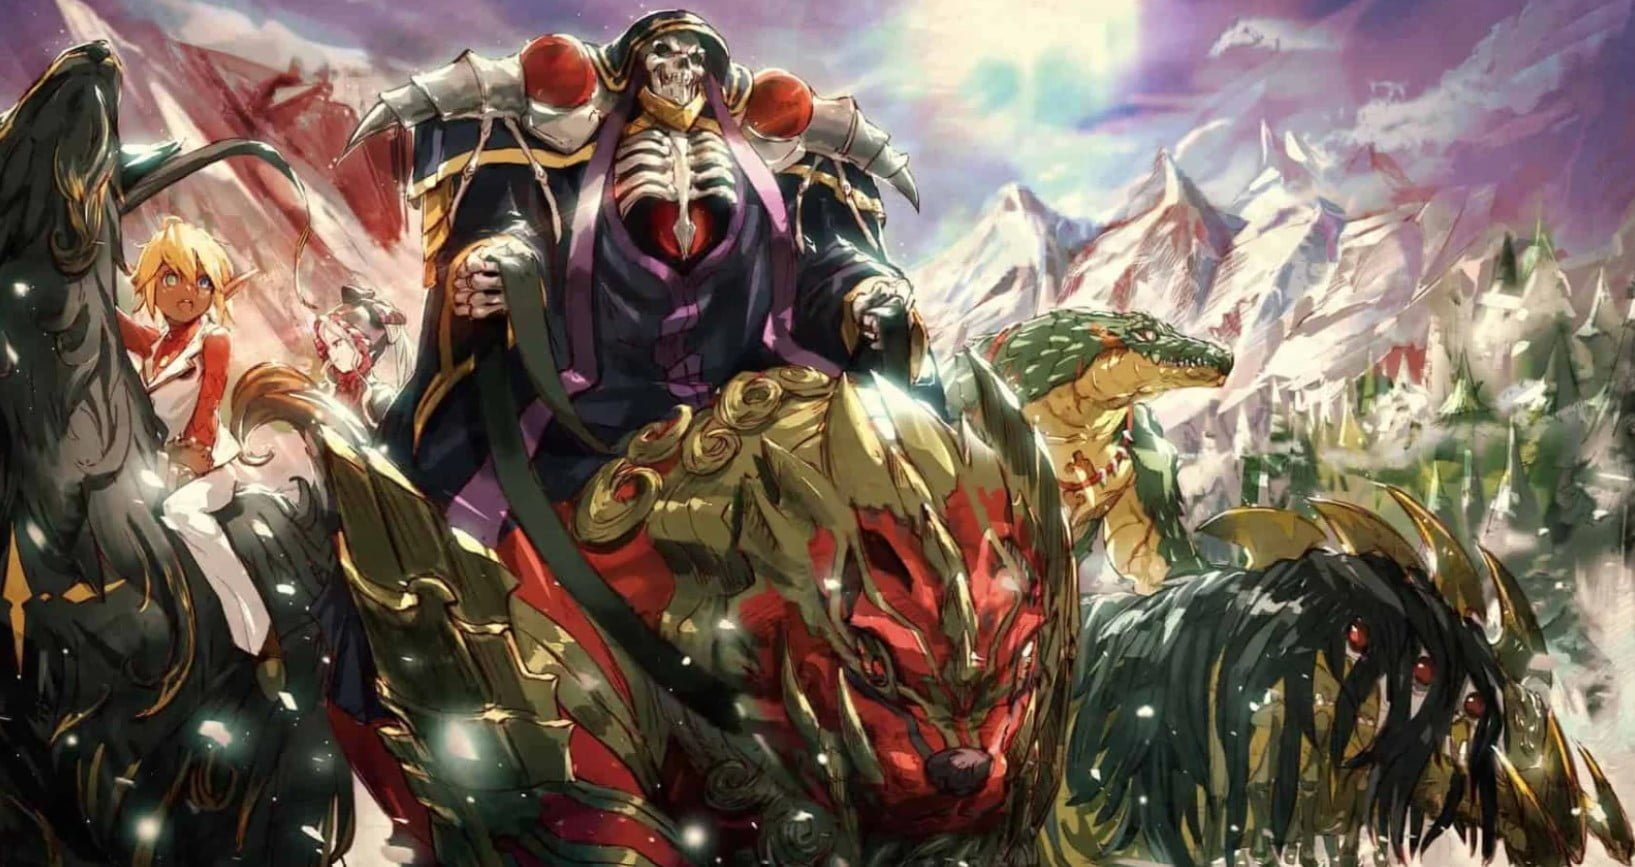 Overlord Season 4 Episode 2 Release Date and Watch Online